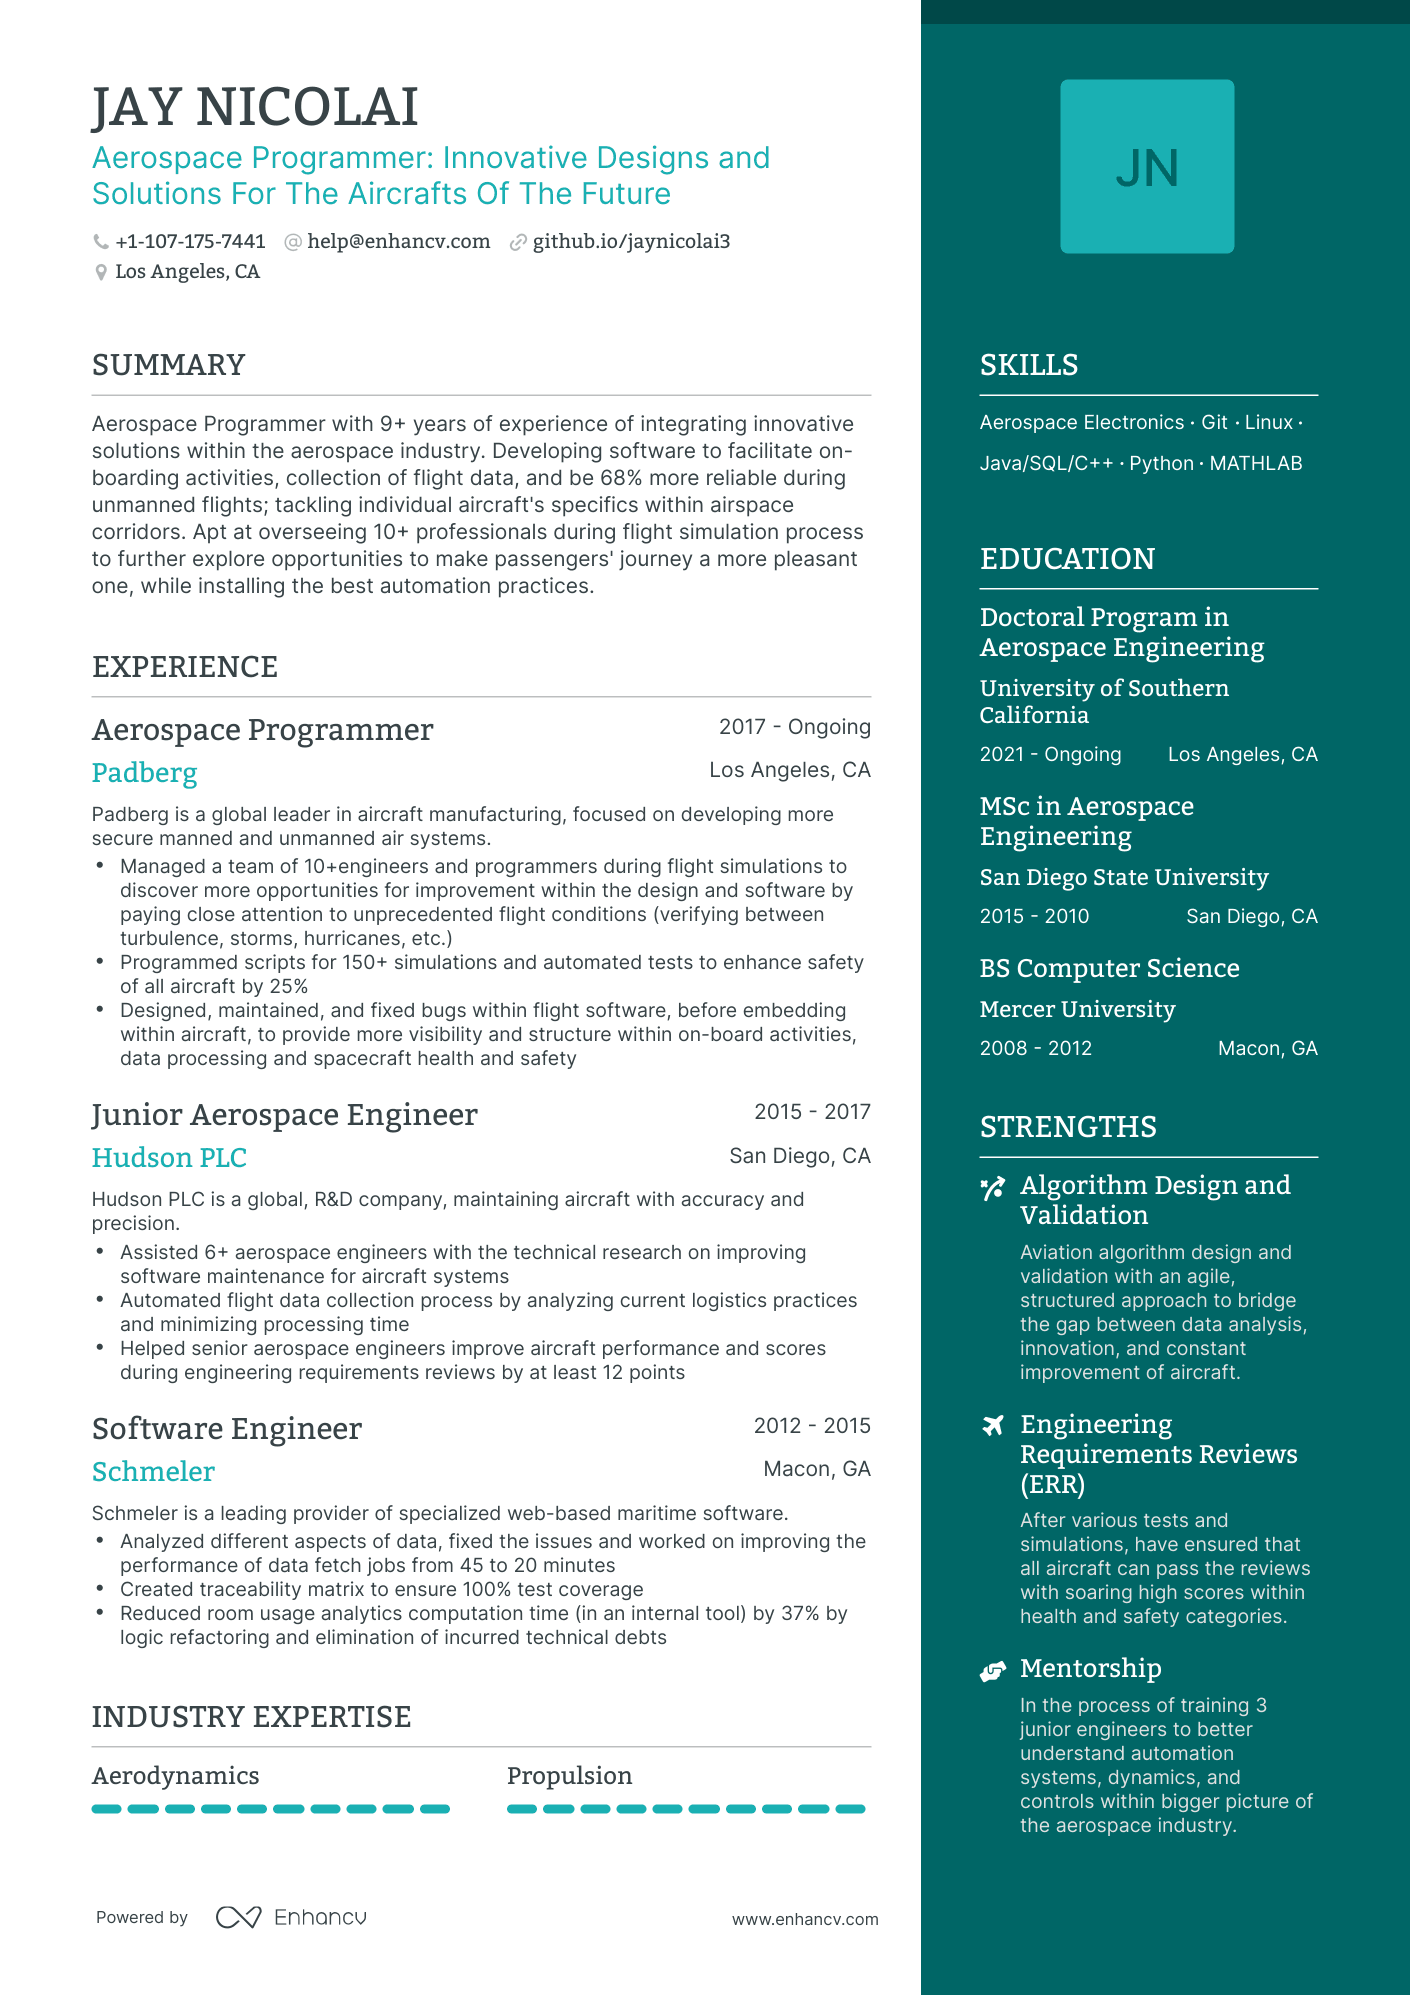 One Page Aerospace Program Manager Resume Template